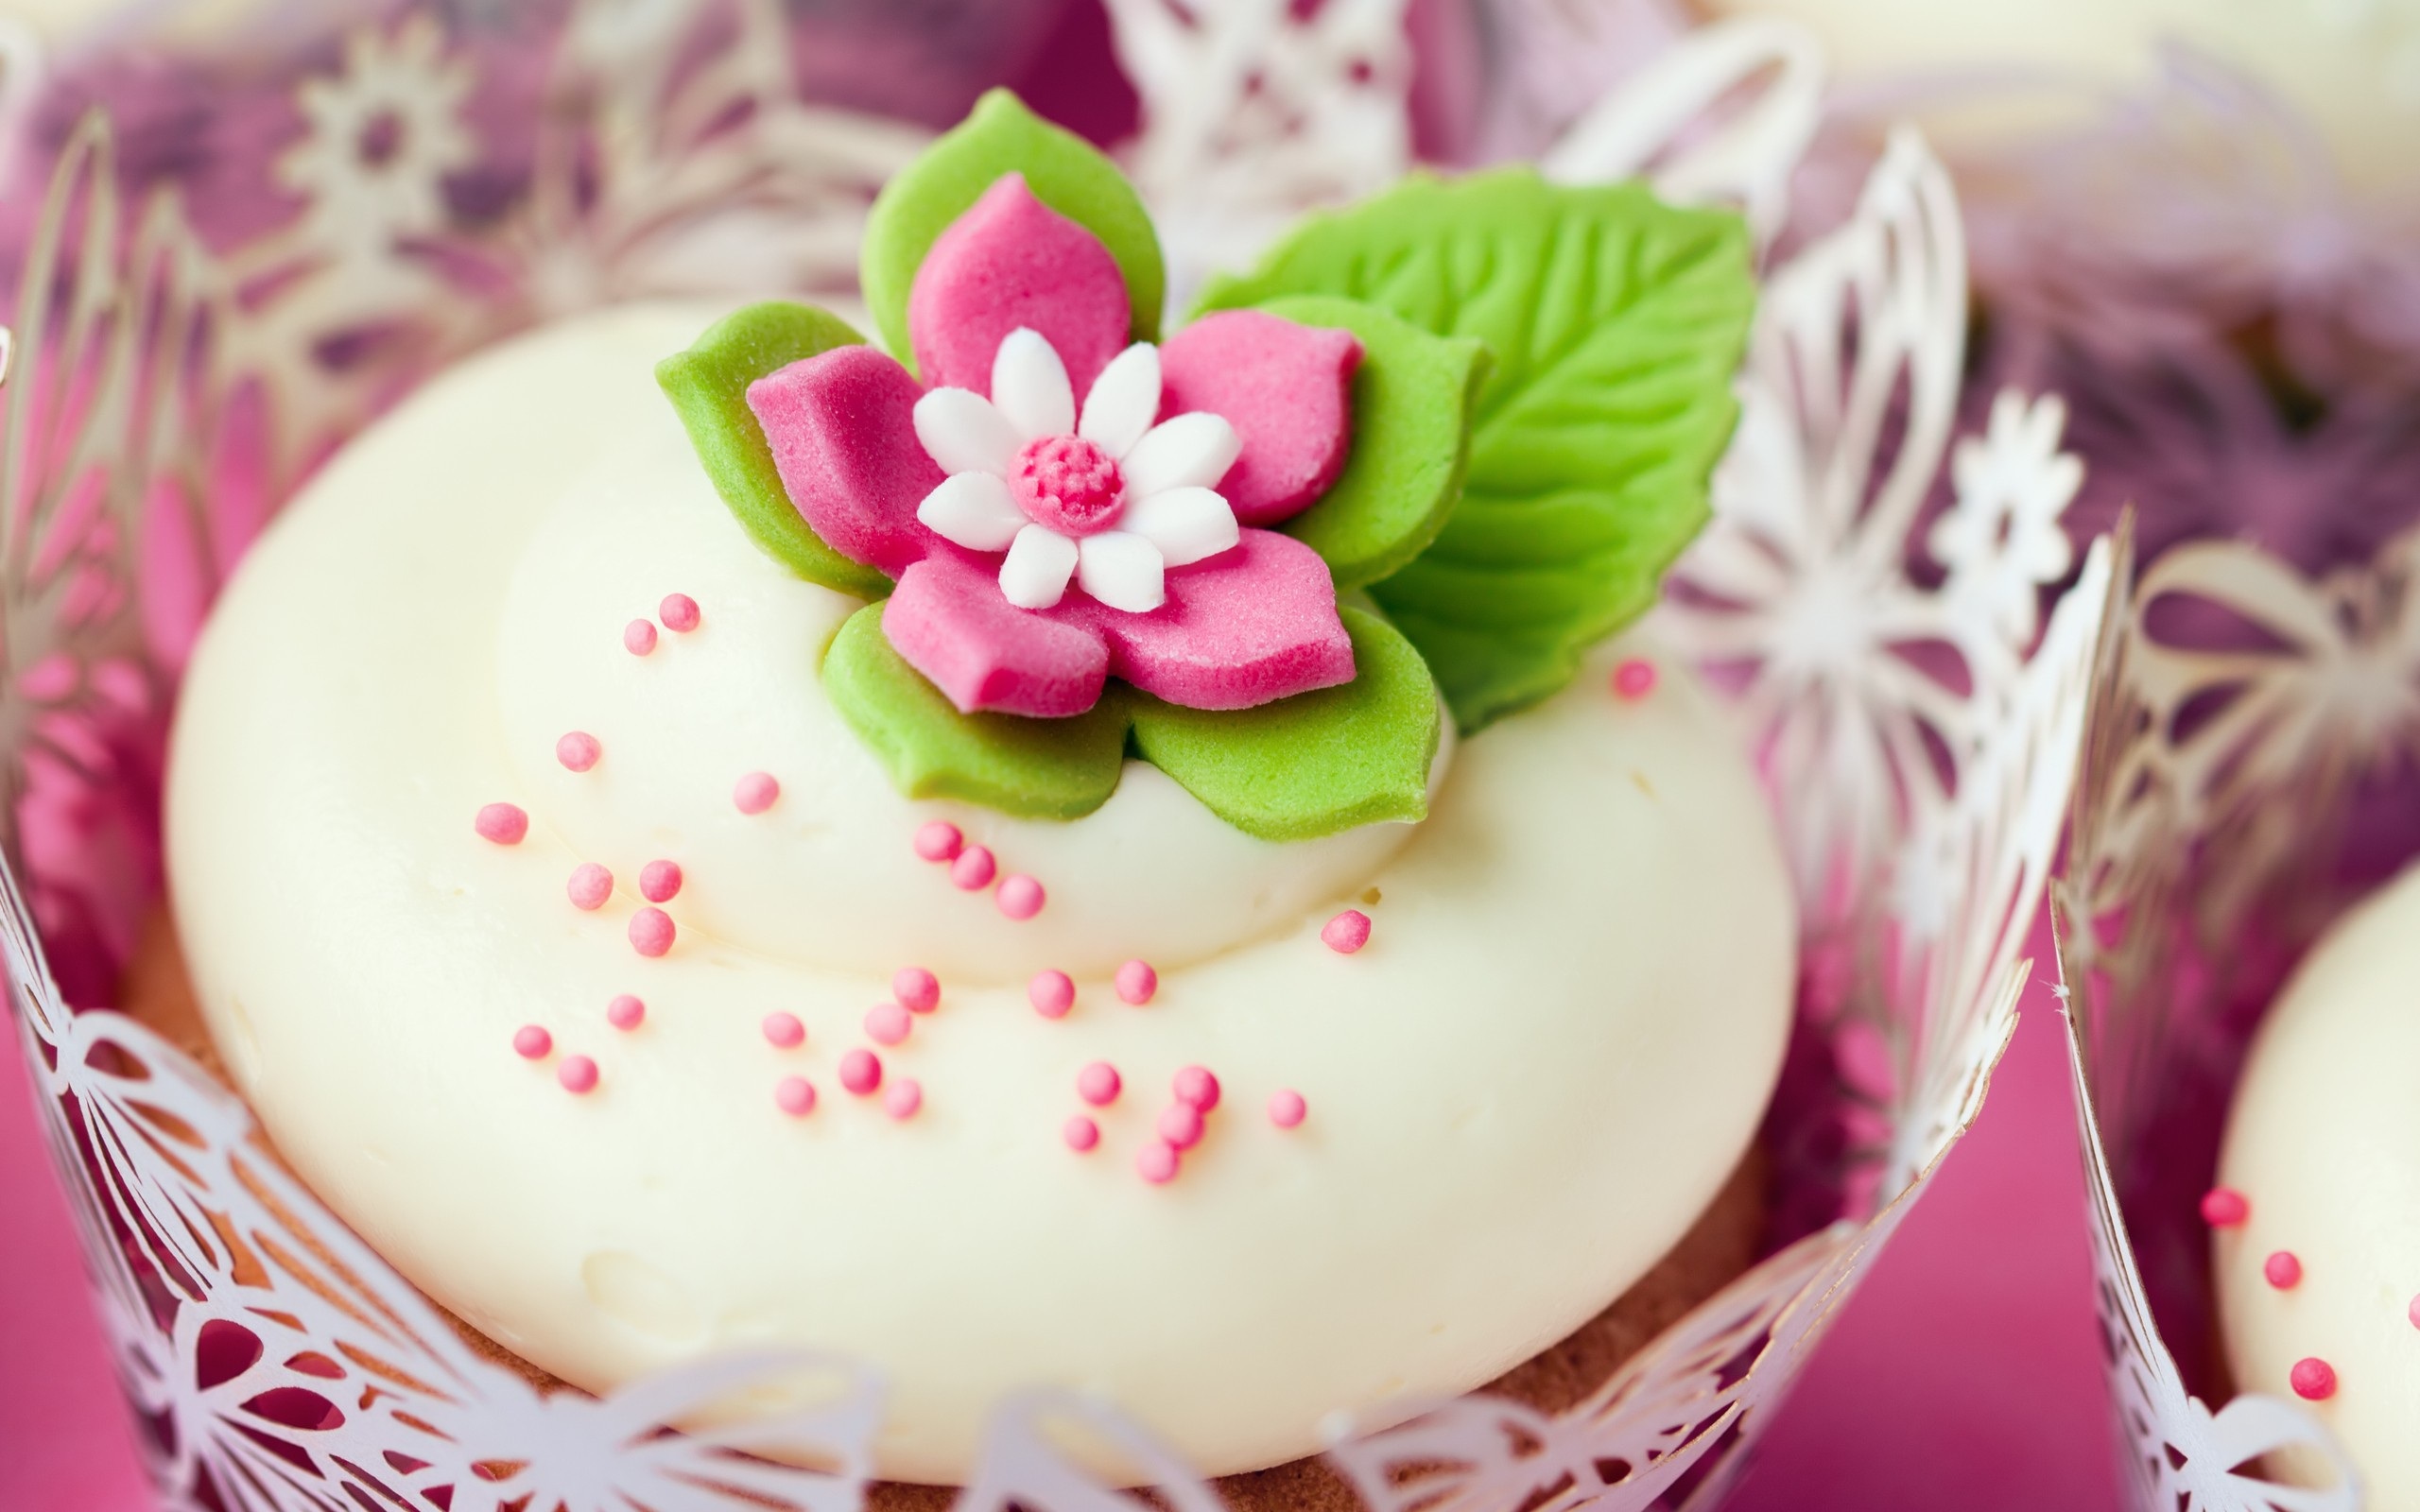 Download Cupcakes Wallpaper 654 2560x1600 px High Resolution ...